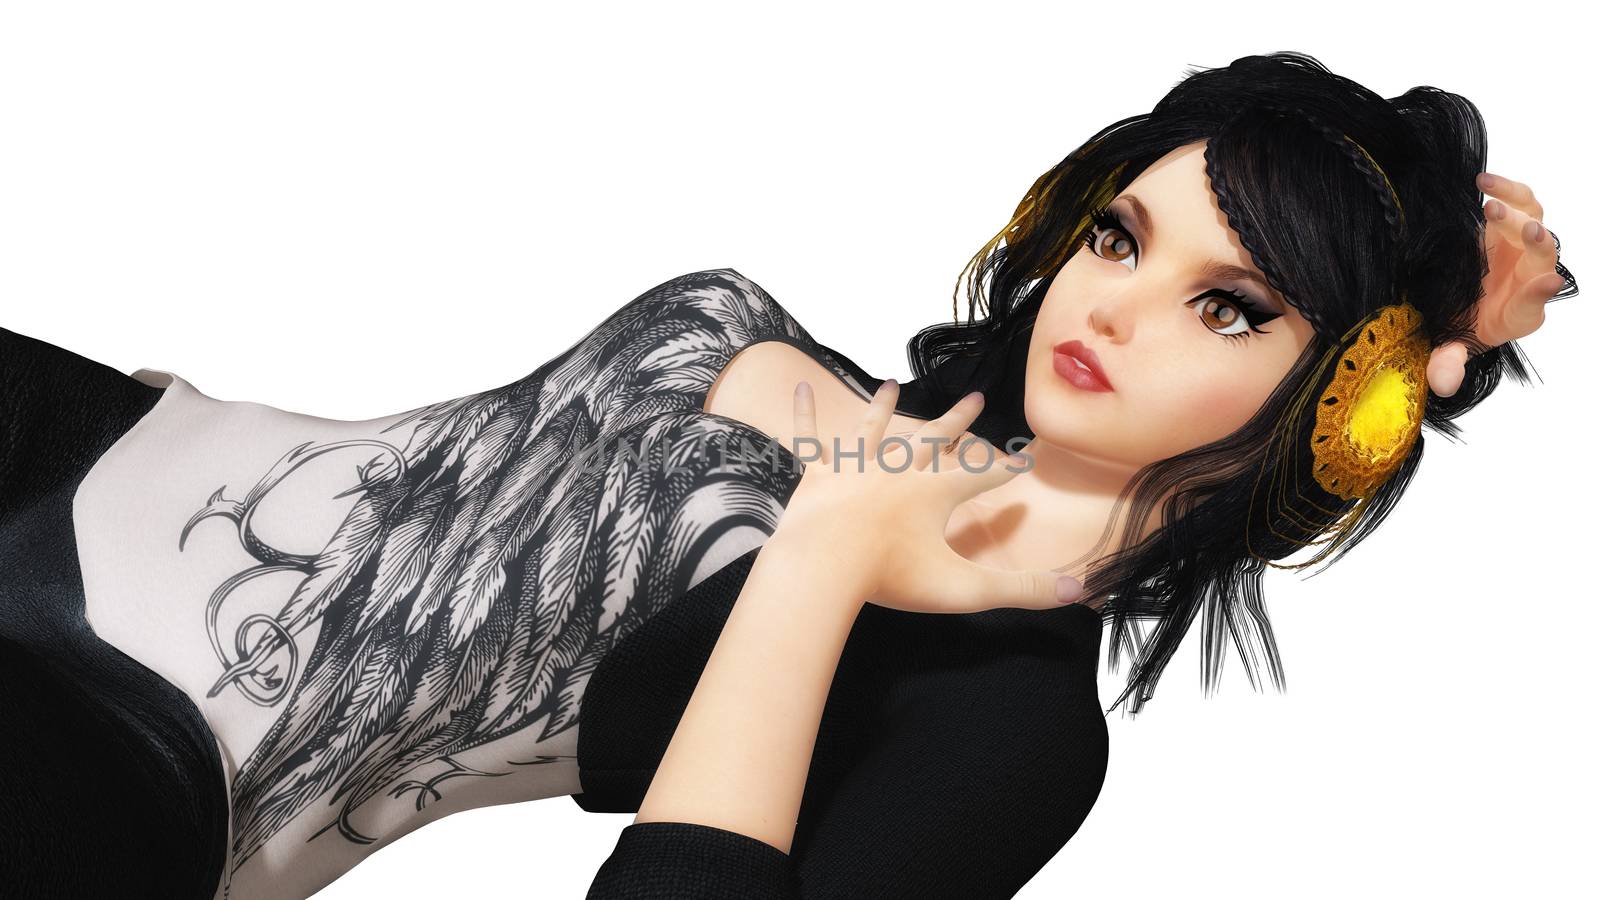 Digital 3D Illustration of a young Female by 3quarks